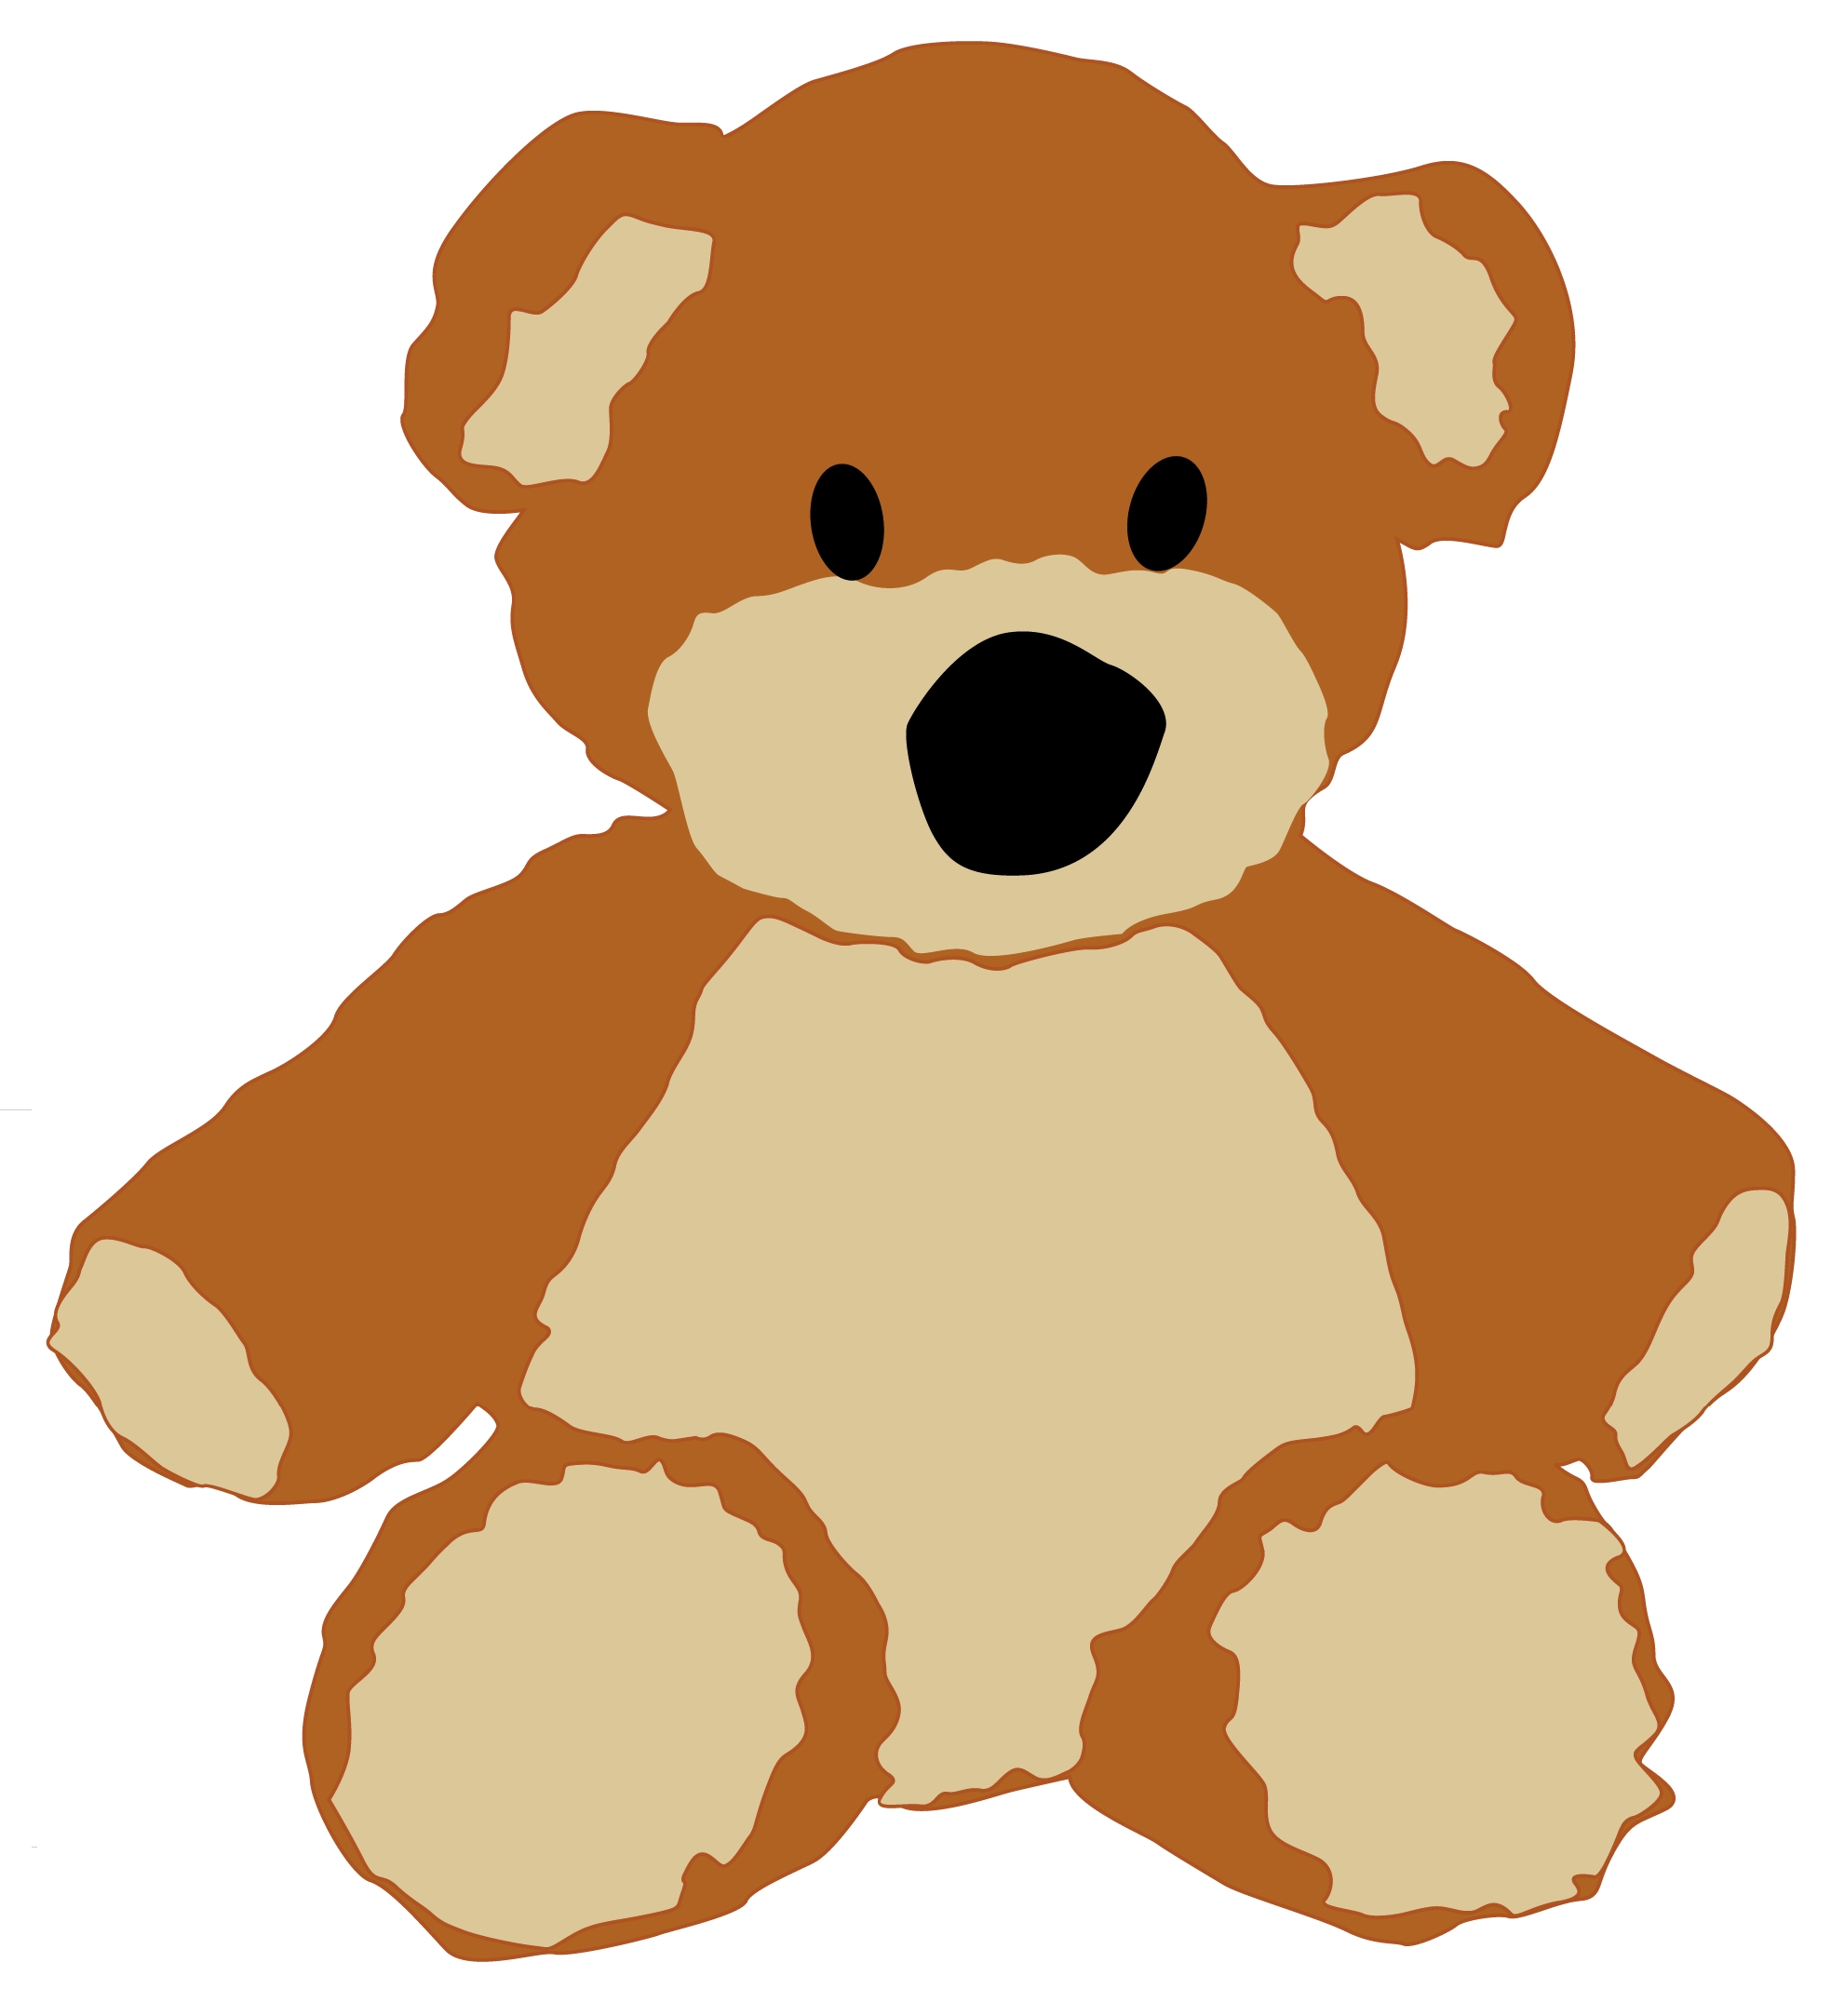 Teddy Free Images At Clker Co - Teddy Bear Clip Art Free